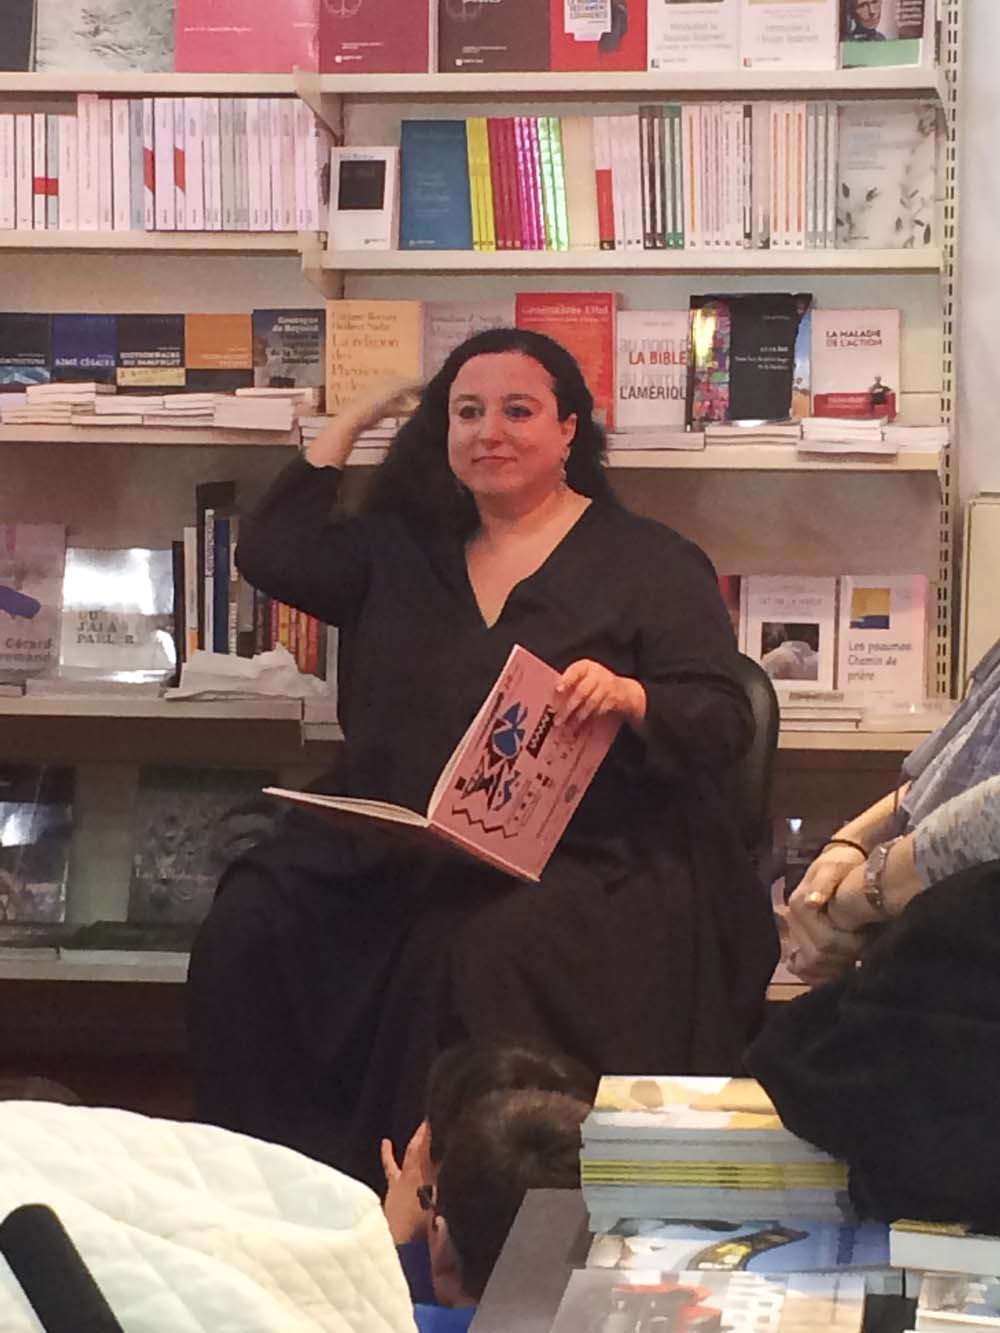 later on at biel, nadine touma reads from dar omboz's newly published book 'la souris', or 'the mouse'. the book is a fable in french and arabic by the late chafik abboud